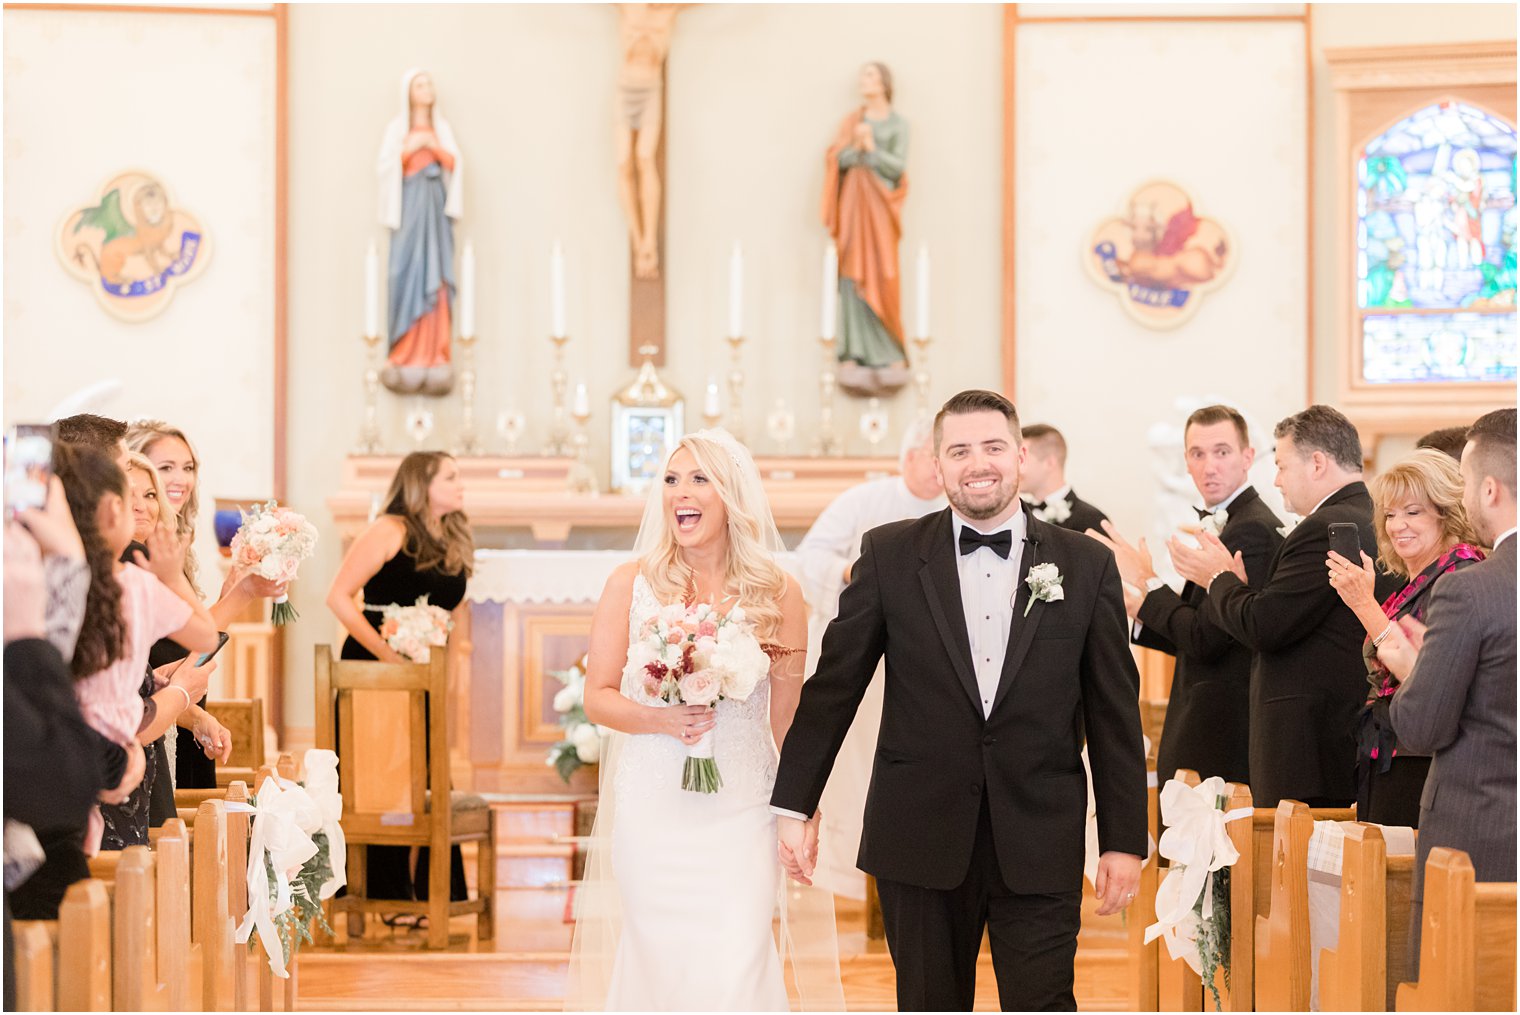 bride laughs walking up aisle with groom after church wedding ceremony in New Jersey